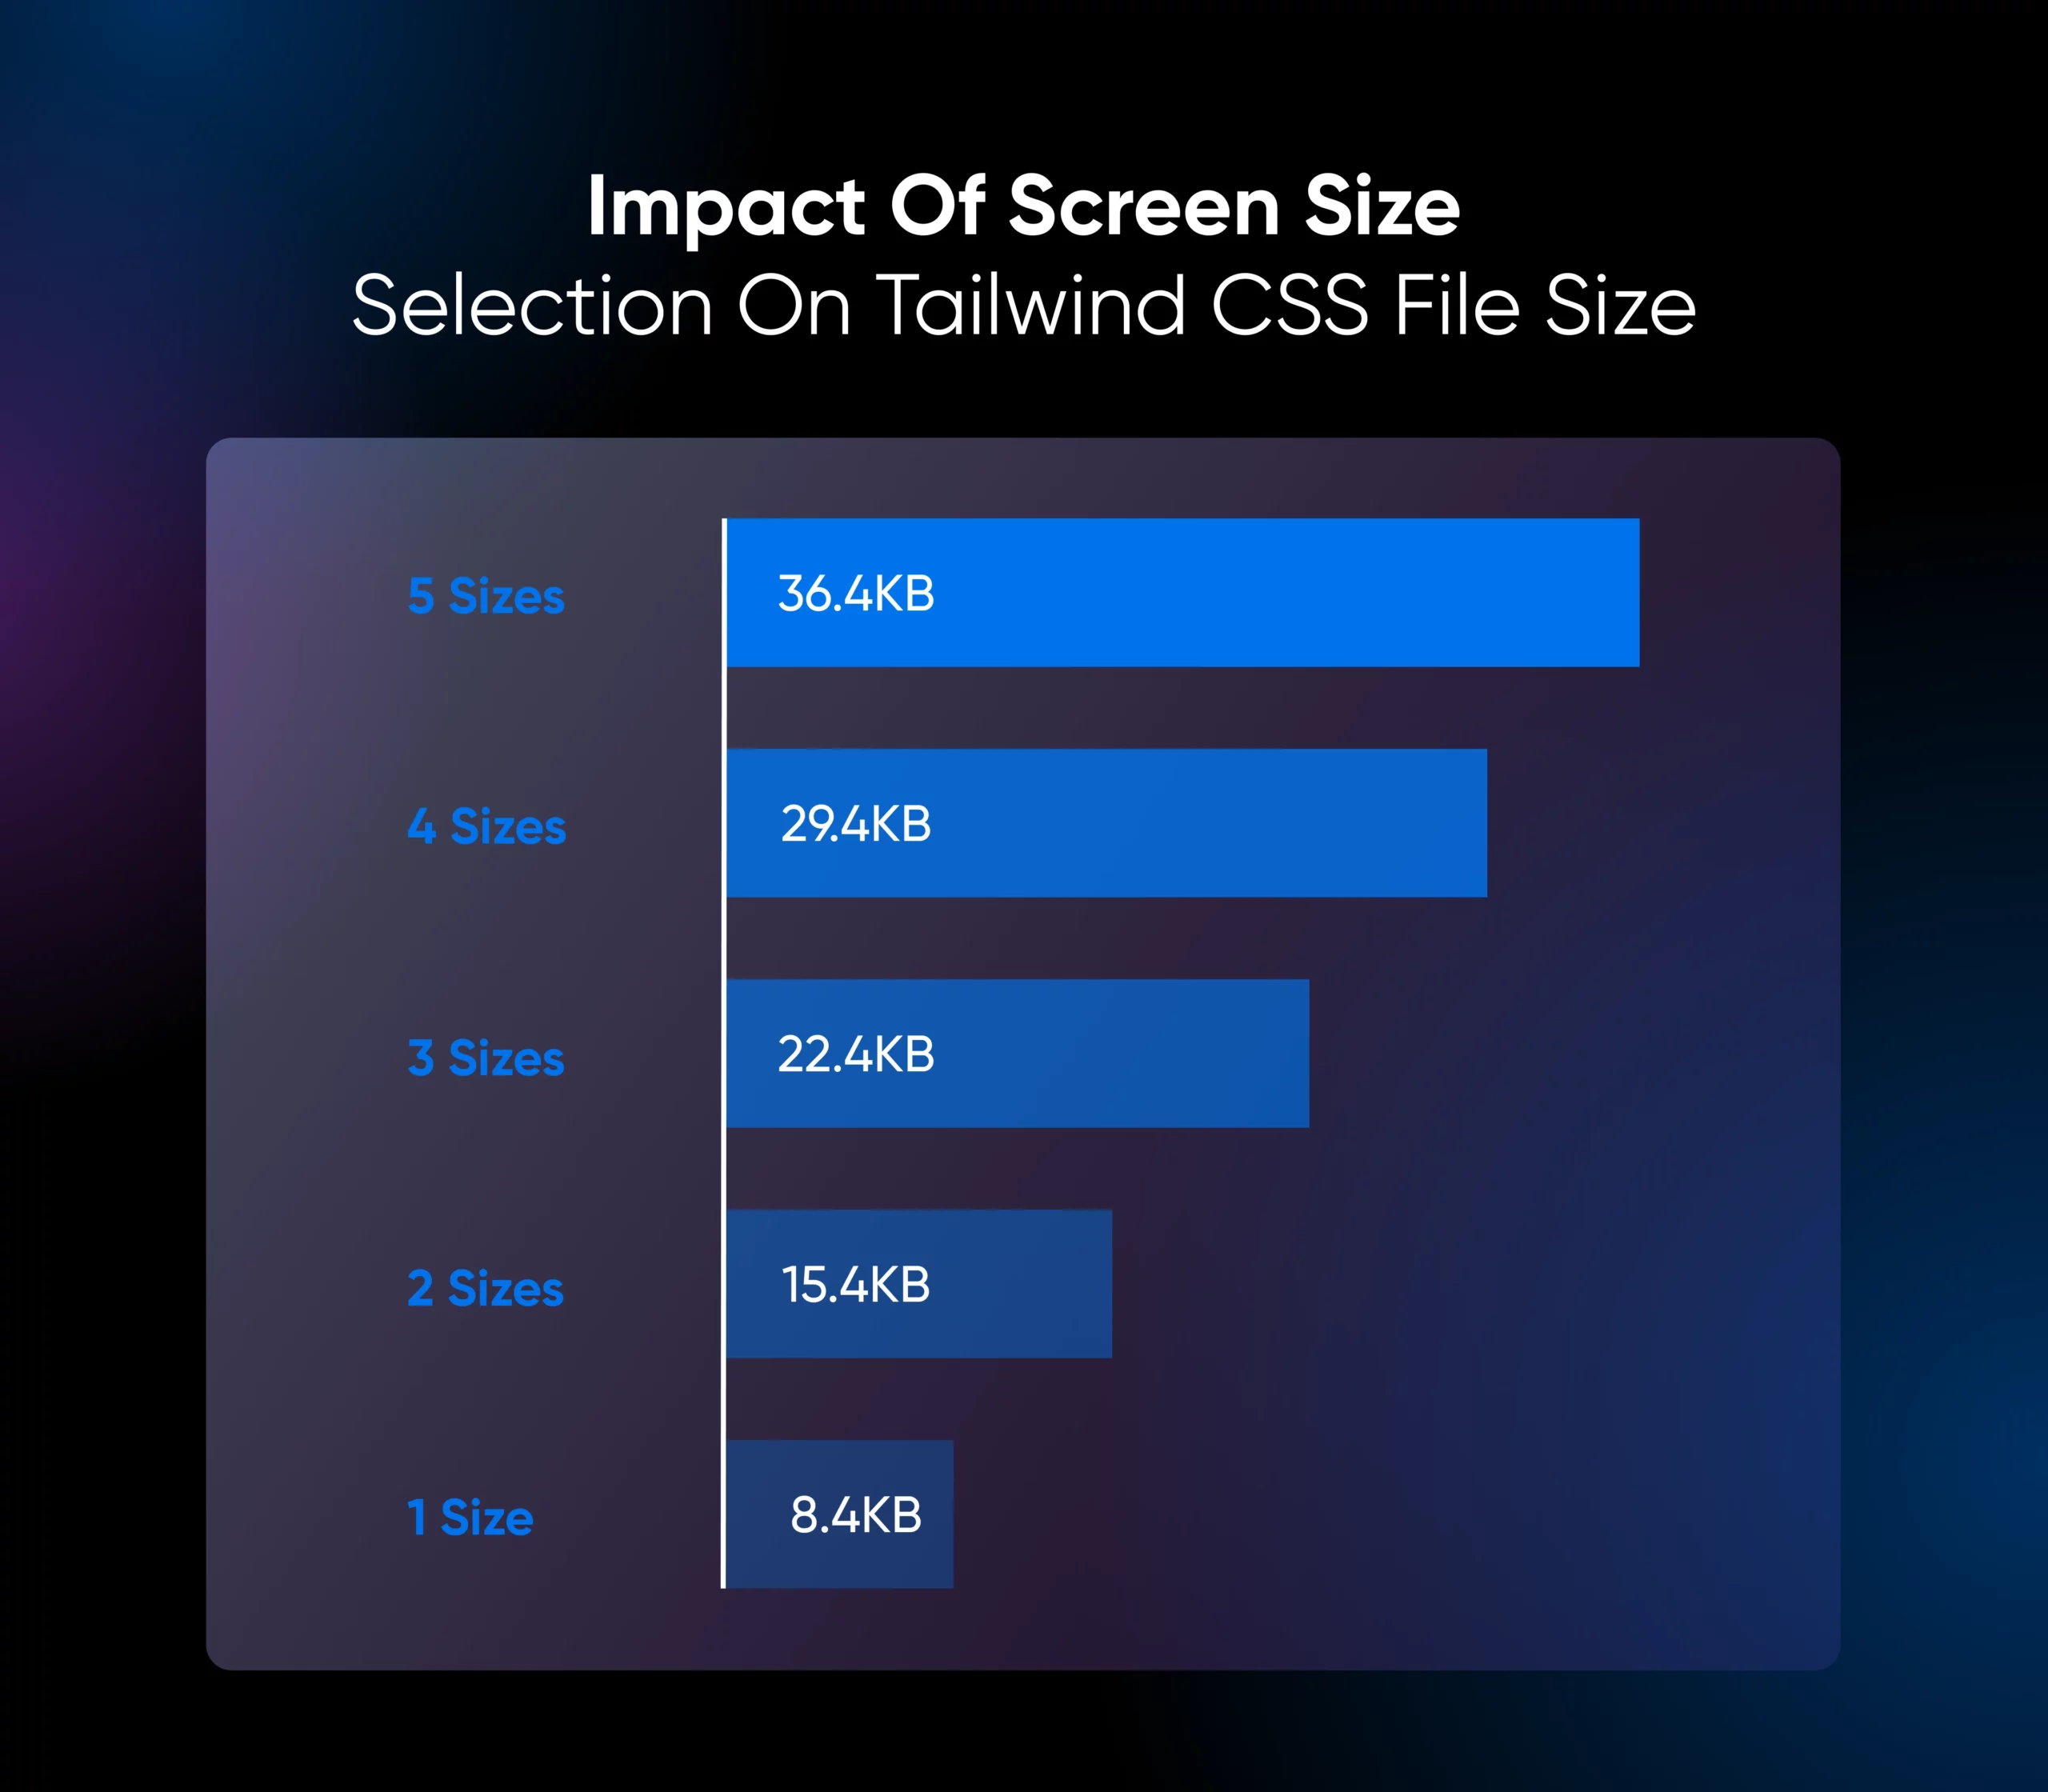 Graph showing varying shades of blue bars as screen size increases from 8.4KB (1 screen) to 36.4KB (5 screen)